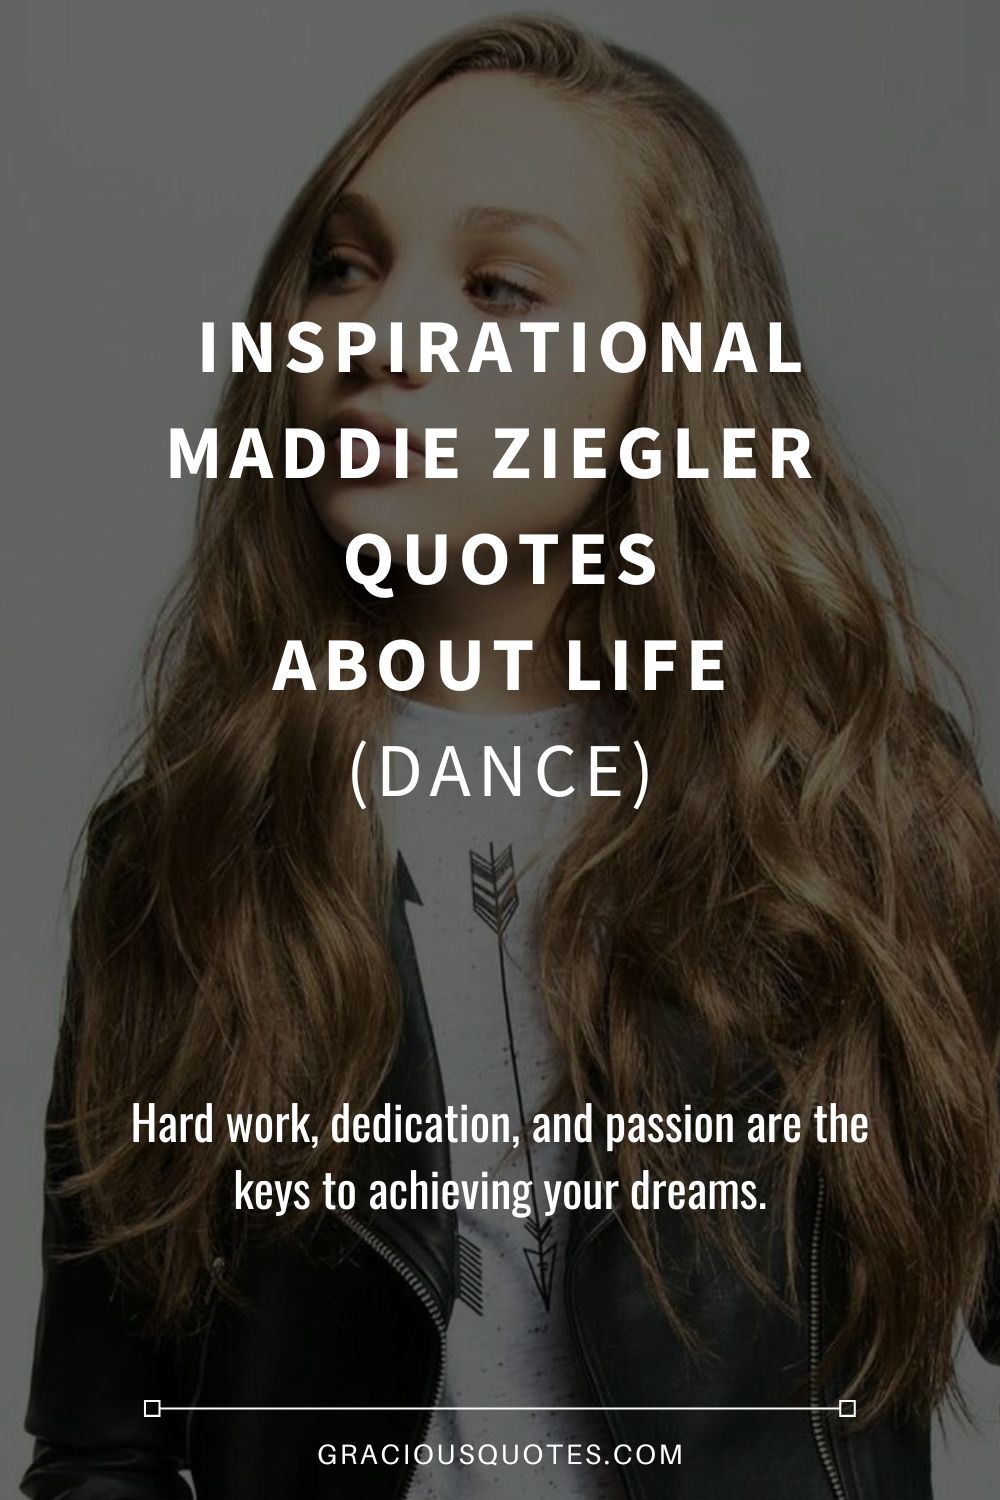 Inspirational Maddie Ziegler Quotes About Life (DANCE) - Gracious Quotes